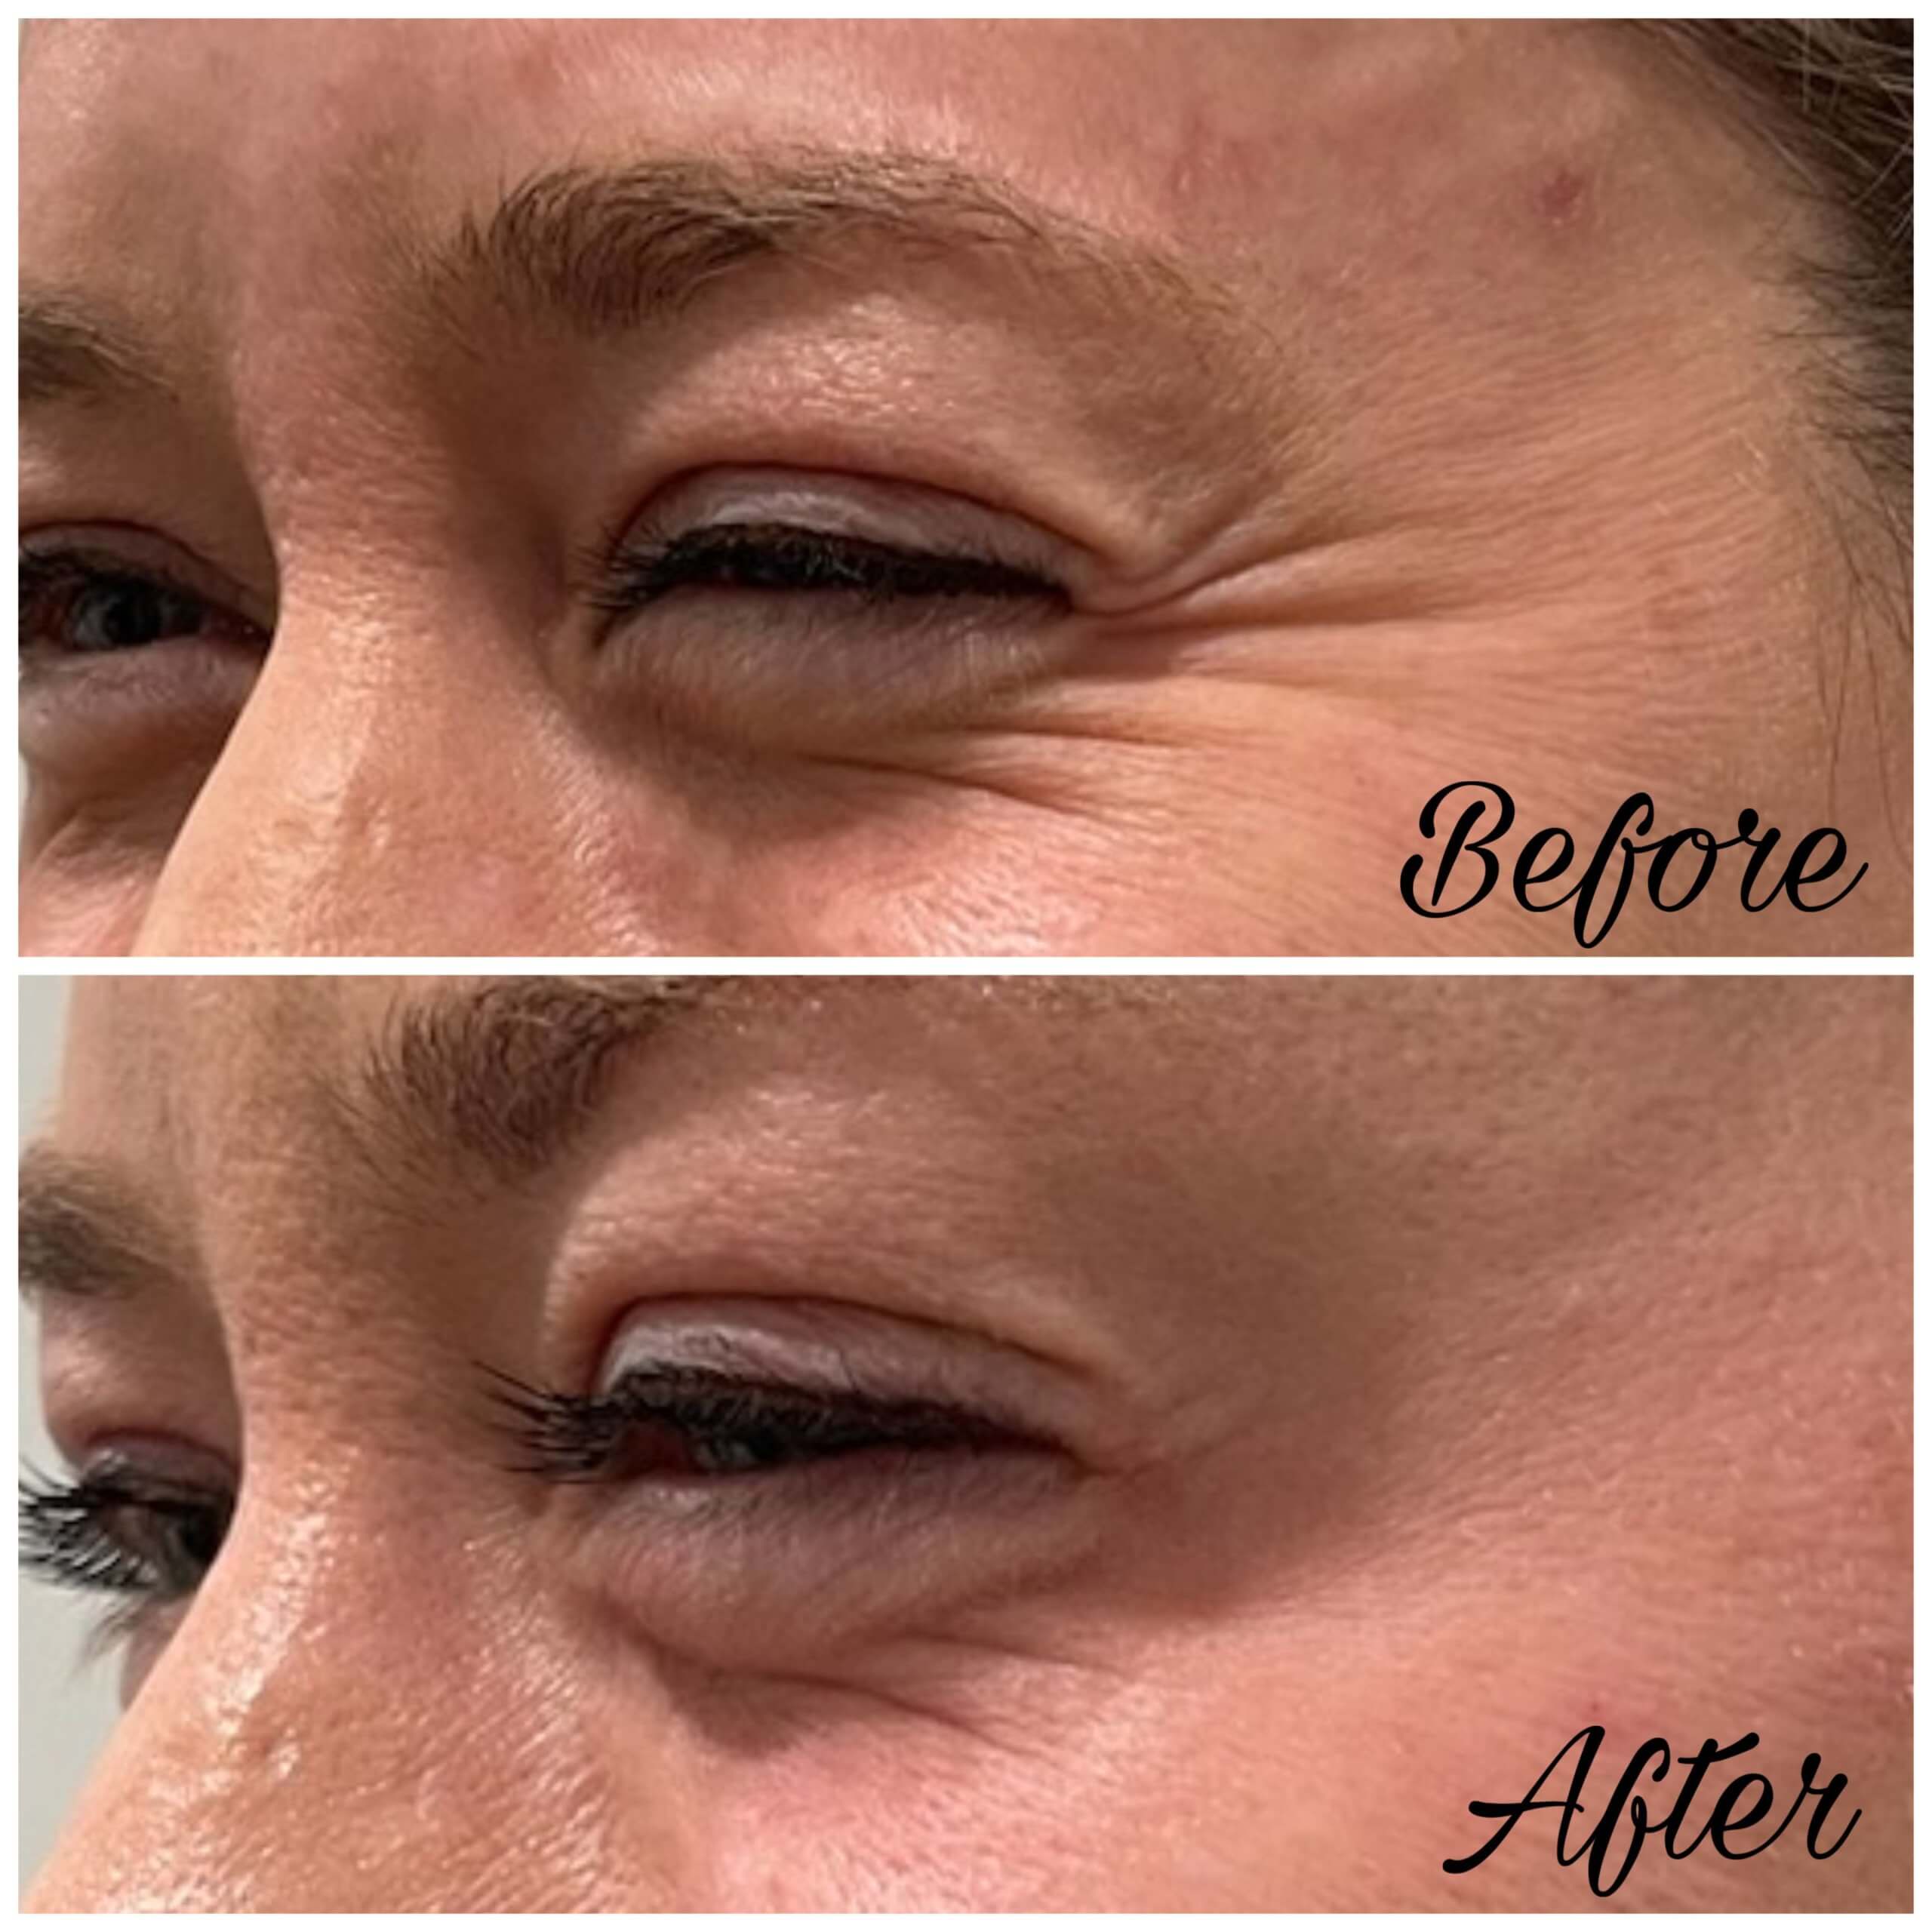 Botox before & after treatment photos in Leominster, MA | Opulent Aesthetics and Wellness